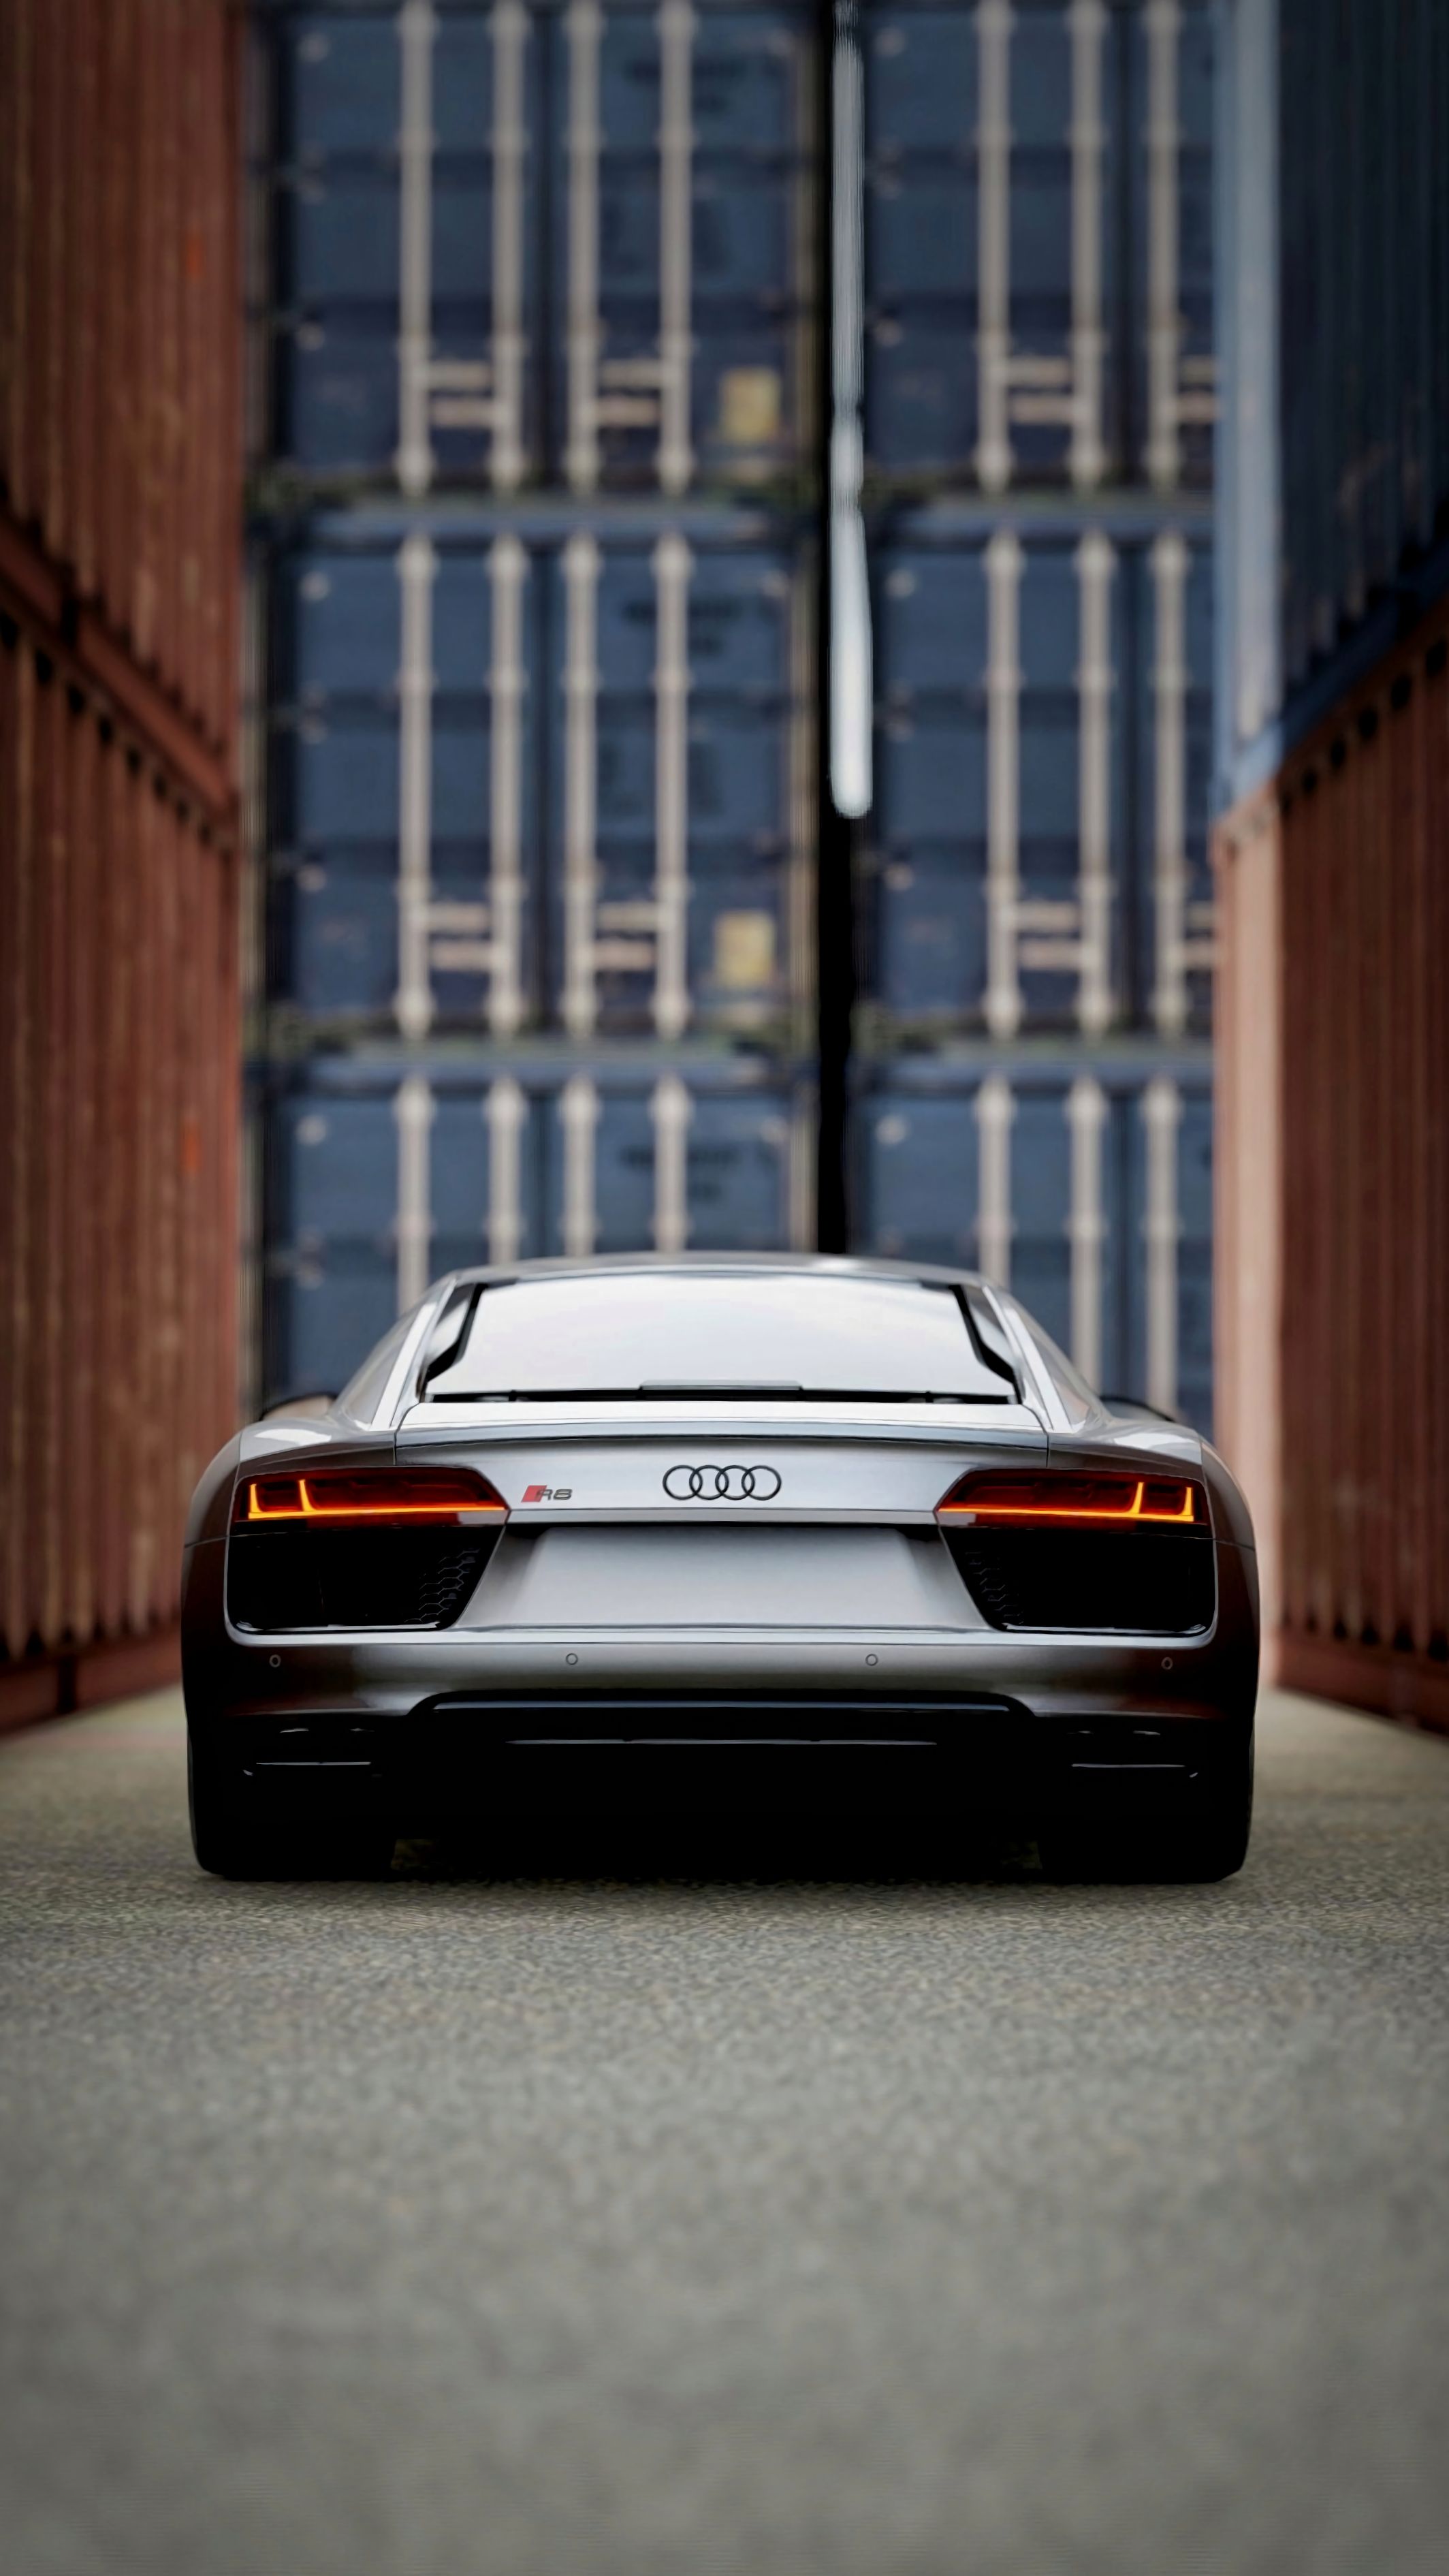 Popular Audi images for mobile phone